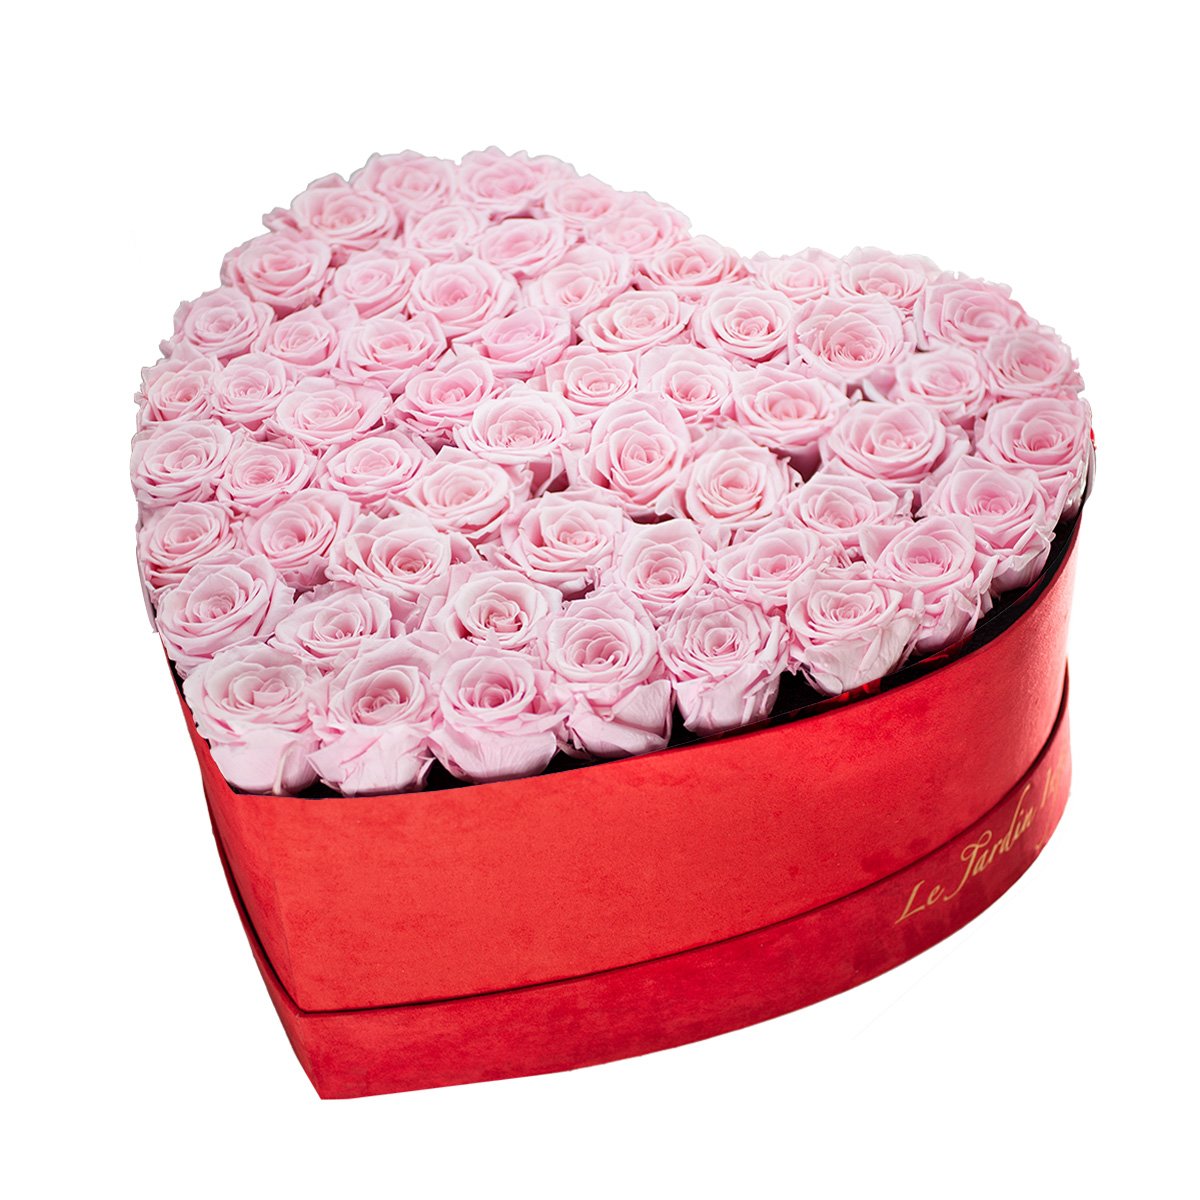 55-65 Soft Pink Preserved Roses in A Heart Shaped Box - Medium Heart